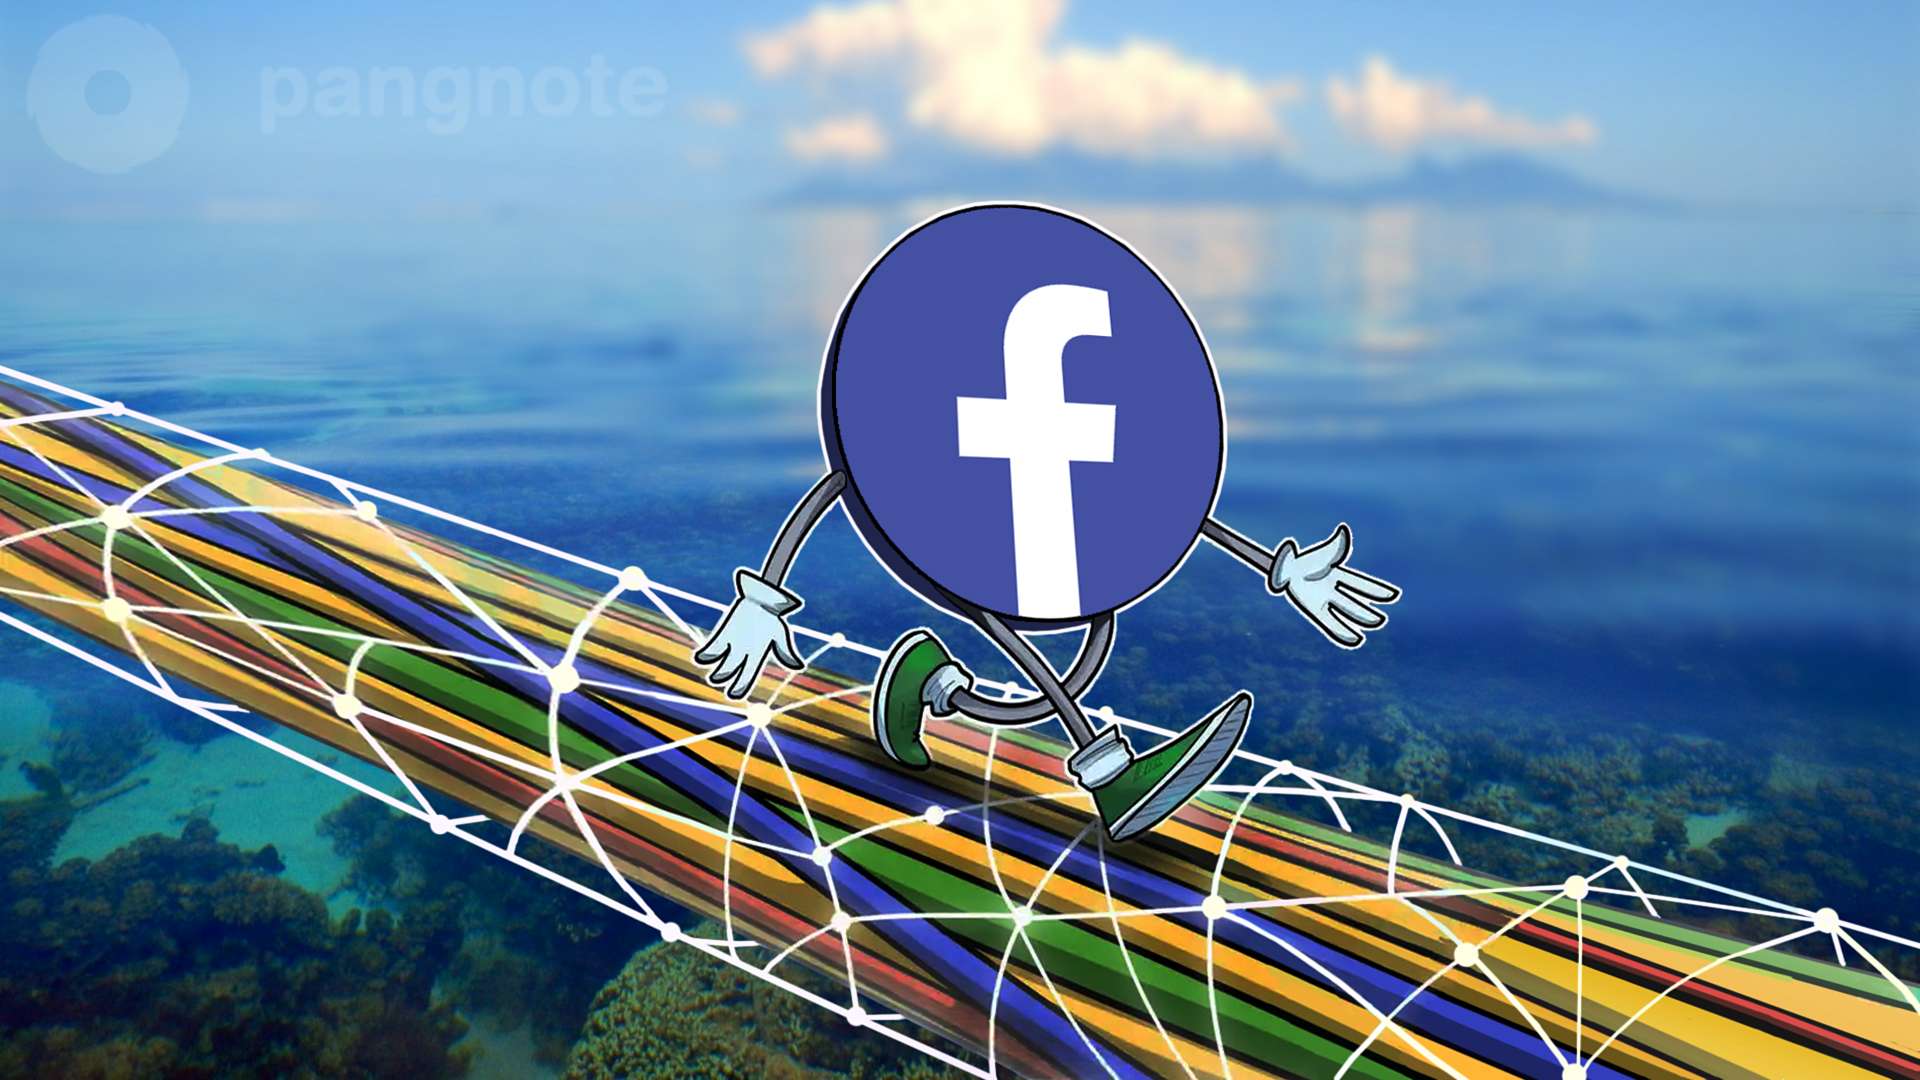 Facebook improves connectivity in the African region with an undersea internet cable